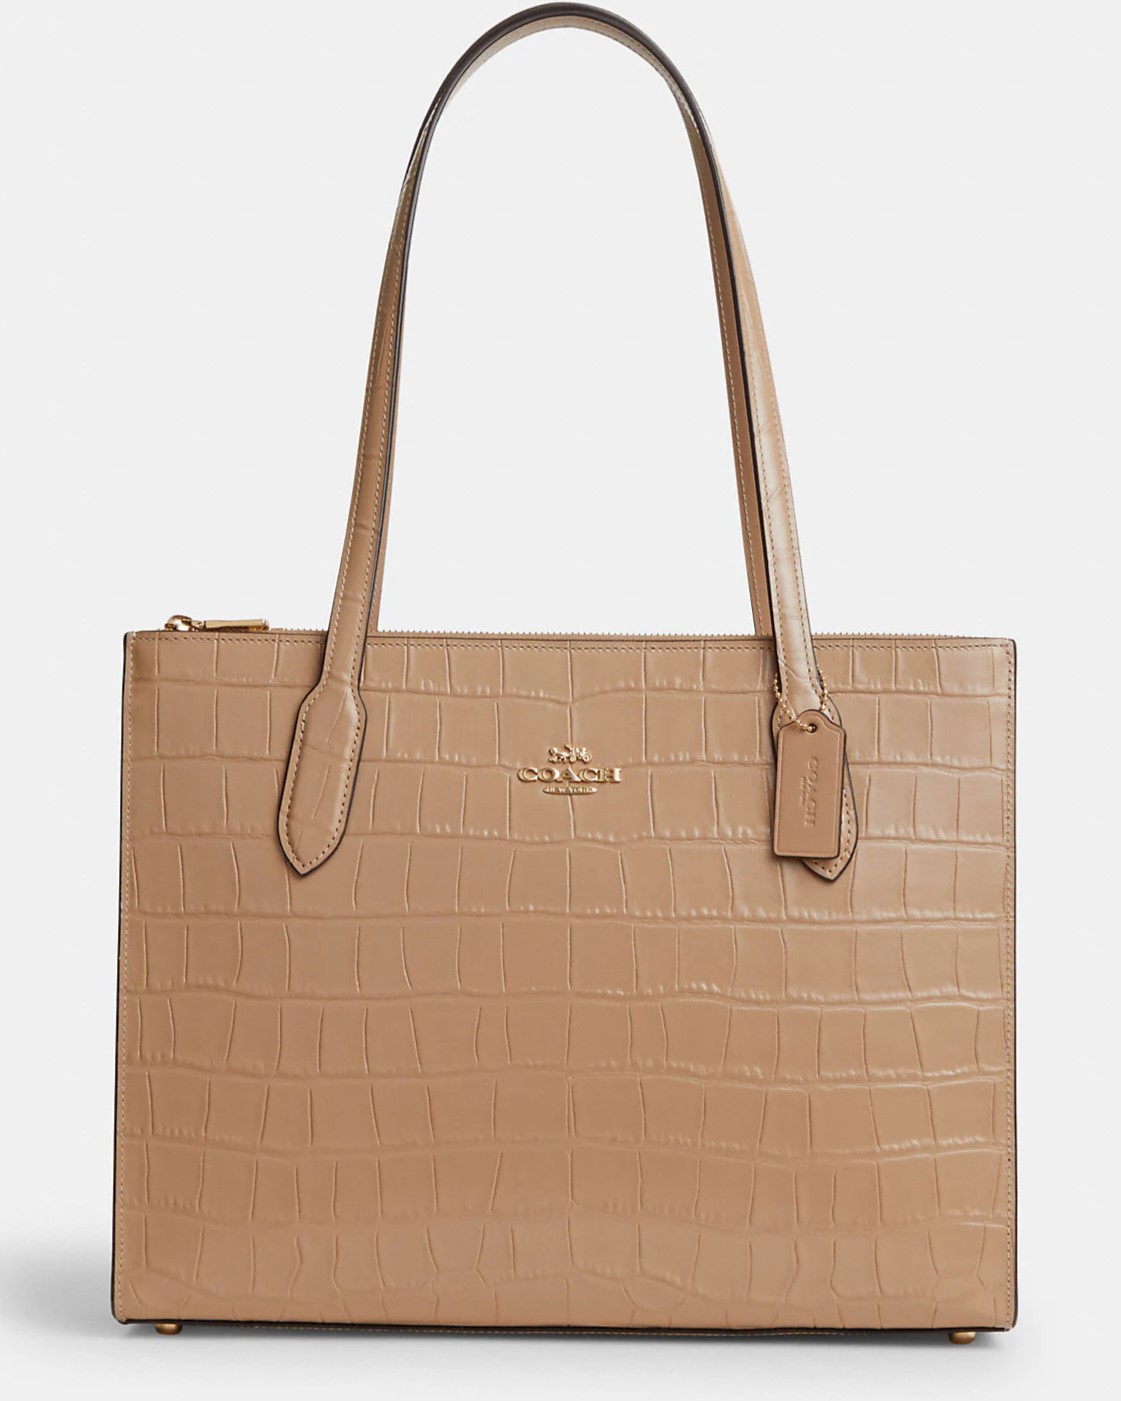 TÚI COACH NỮ NINA TOTE CROCODILE-EMBOSSED LEATHER AND SMOOTH LEATHER BAG IN GOLD TAUPE CL654 1